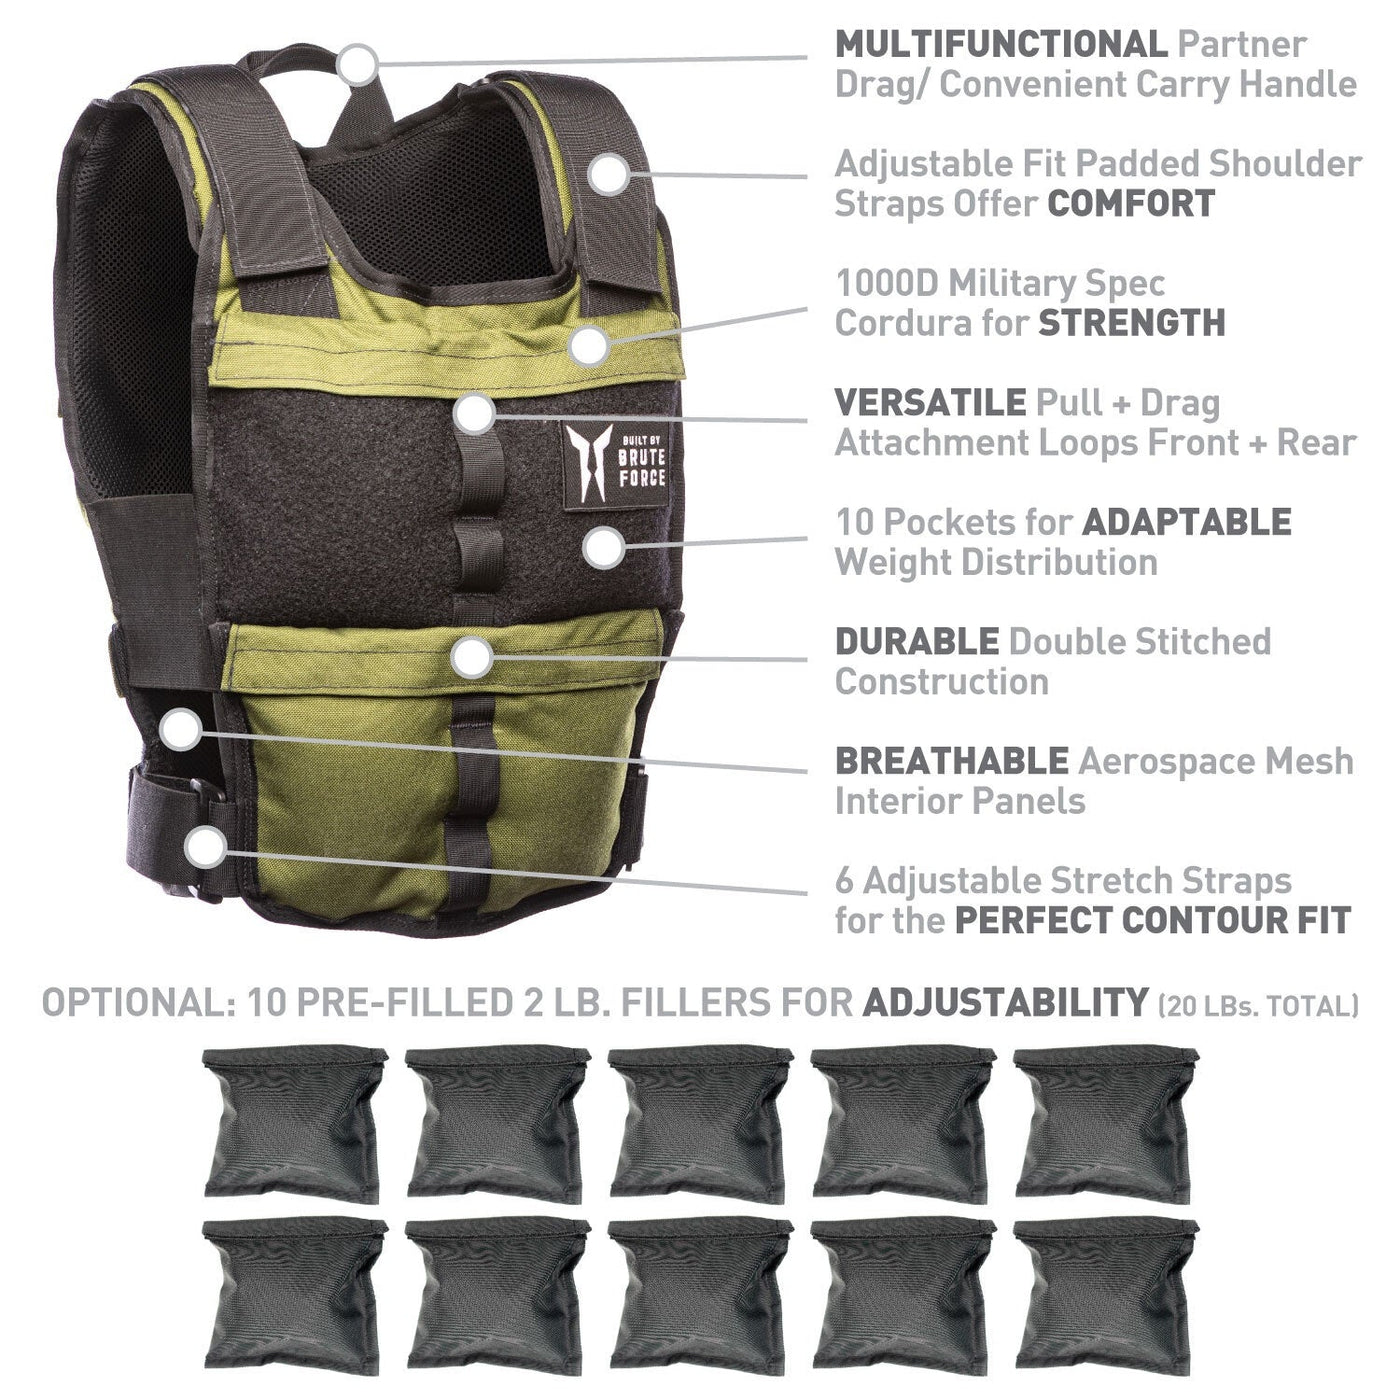 Brute Force Weighted Vest Features